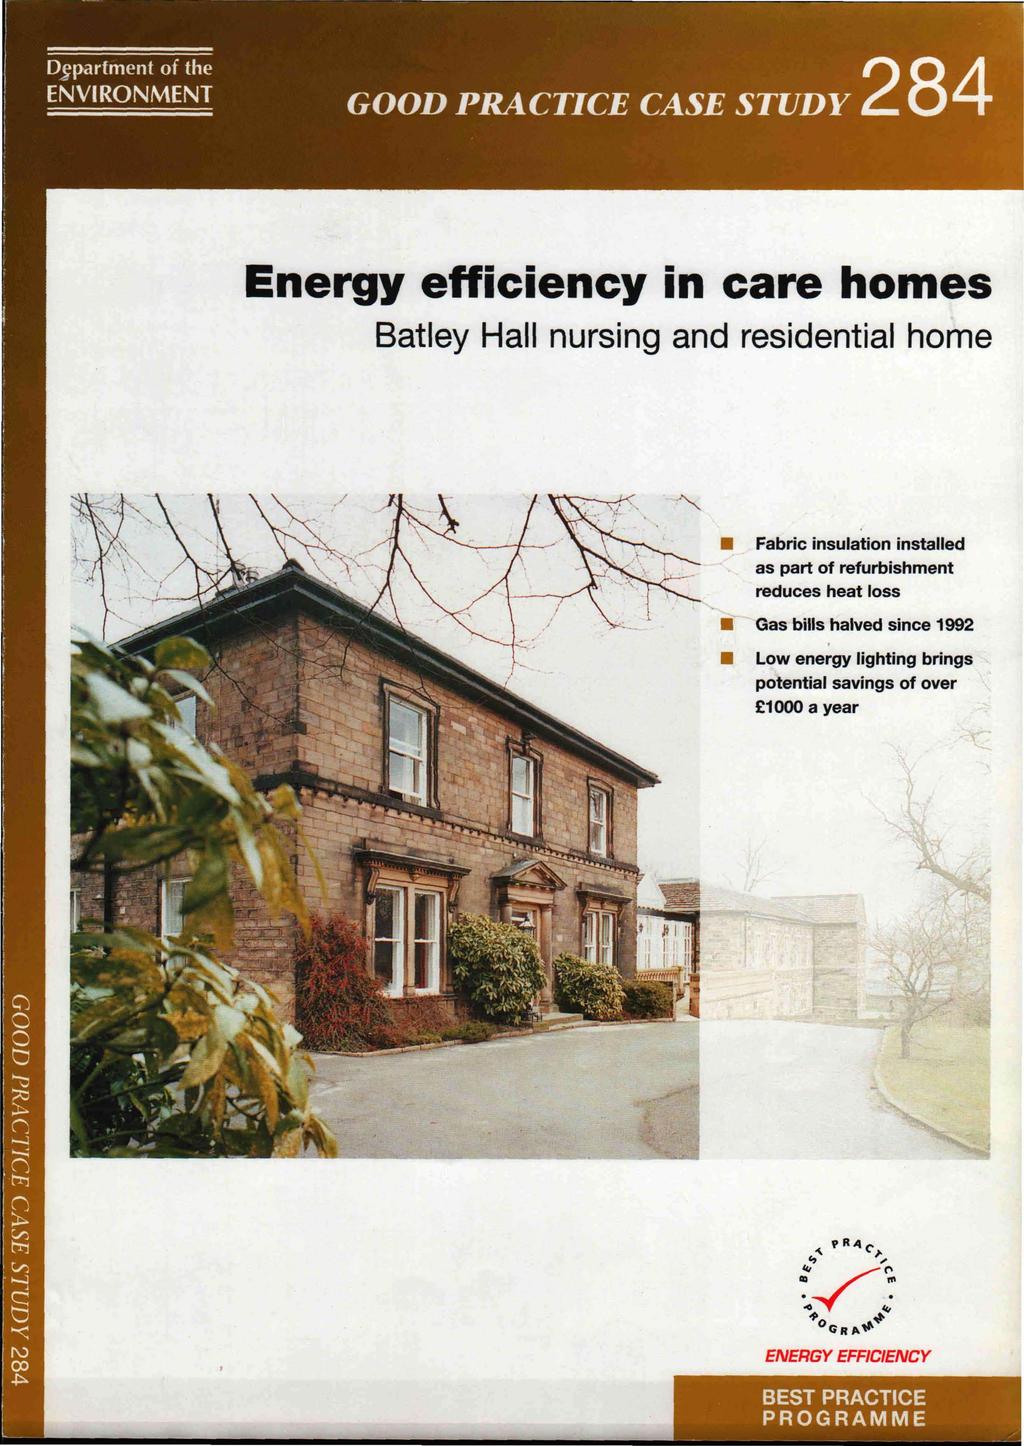 Energy efficiency in care homes 8atley Hall nursing and residential home Fabric insulation installed as part of refurbishment reduces heat loss Gas bills halved